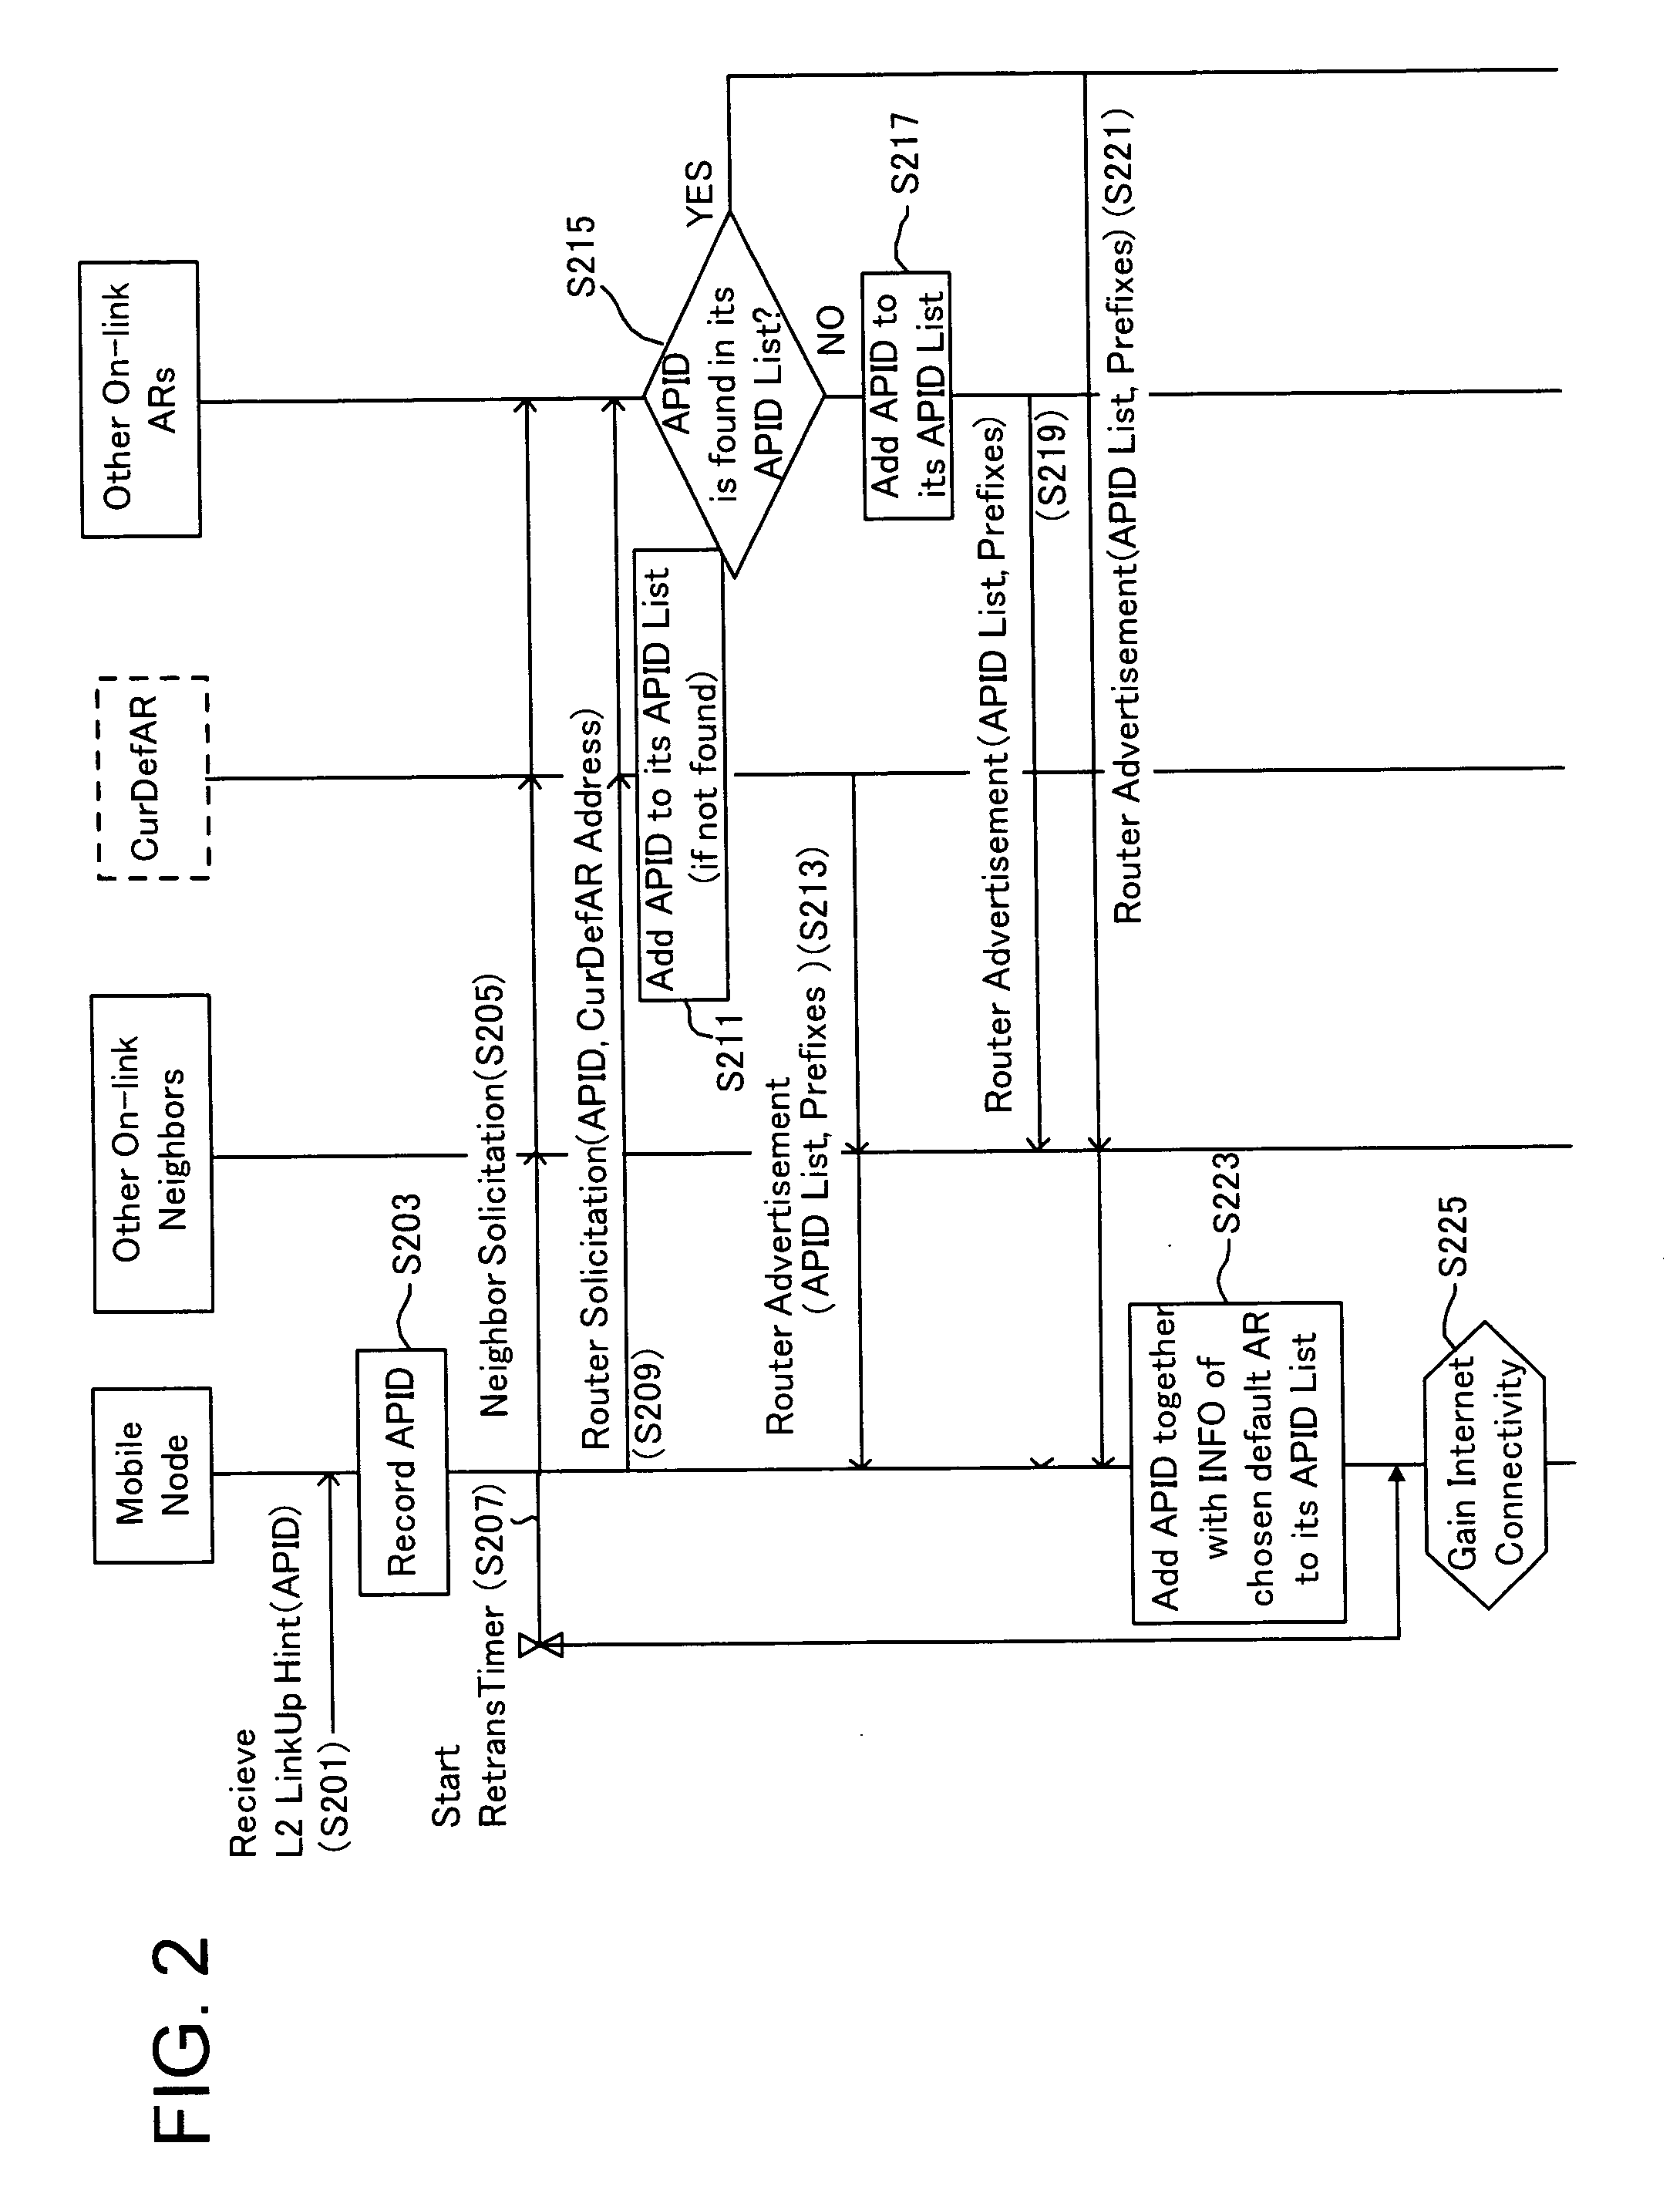 Method and System for Detecting Network Connection in Ipv6 Radio Access Network